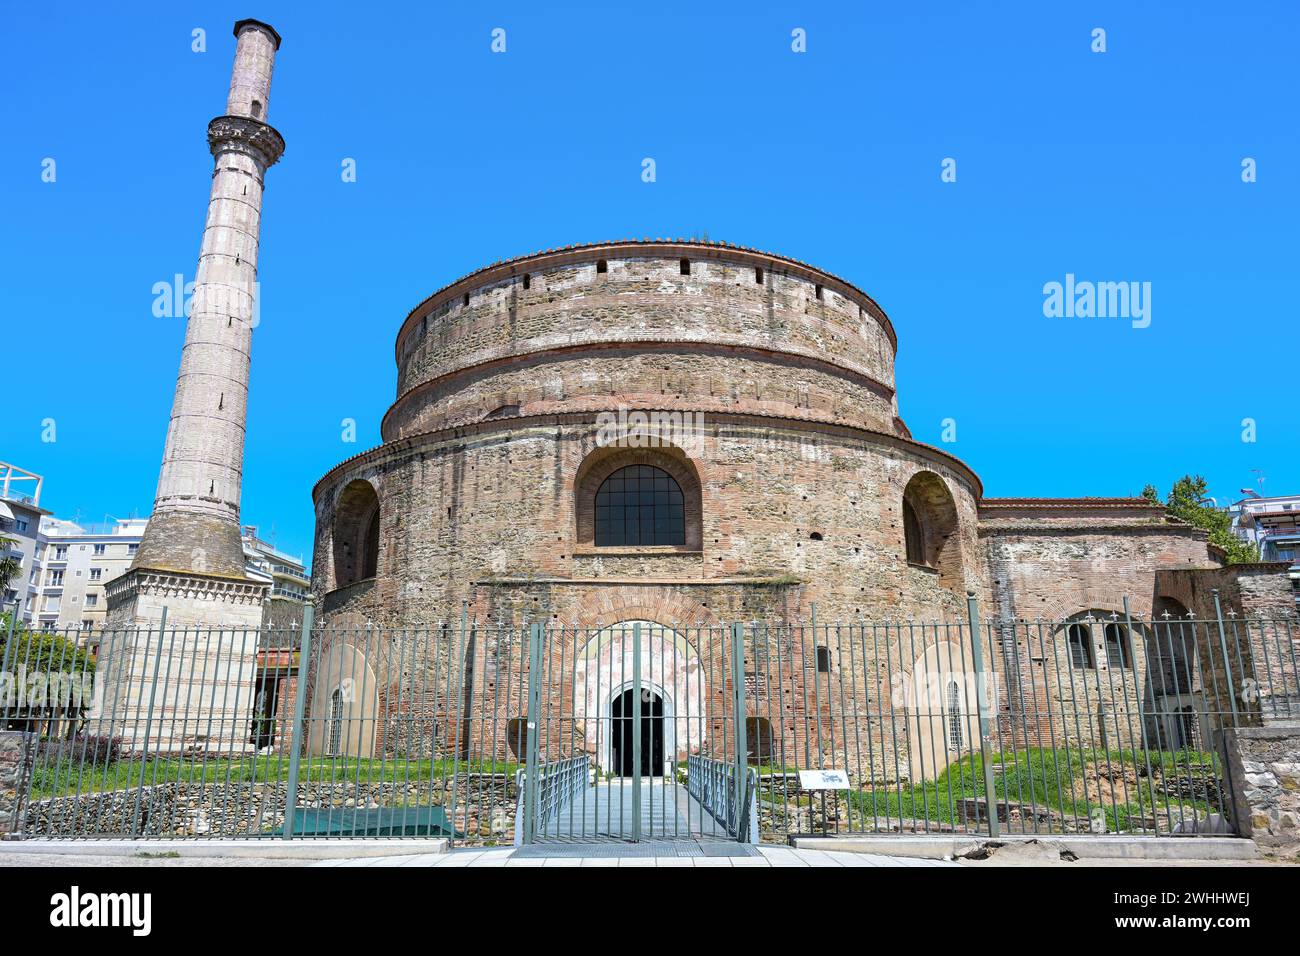 Rotunda mausoleum of Galerius, historic monument constructed in the early 4th century, now Orthodox Church of Agios Georgios, ci Stock Photo